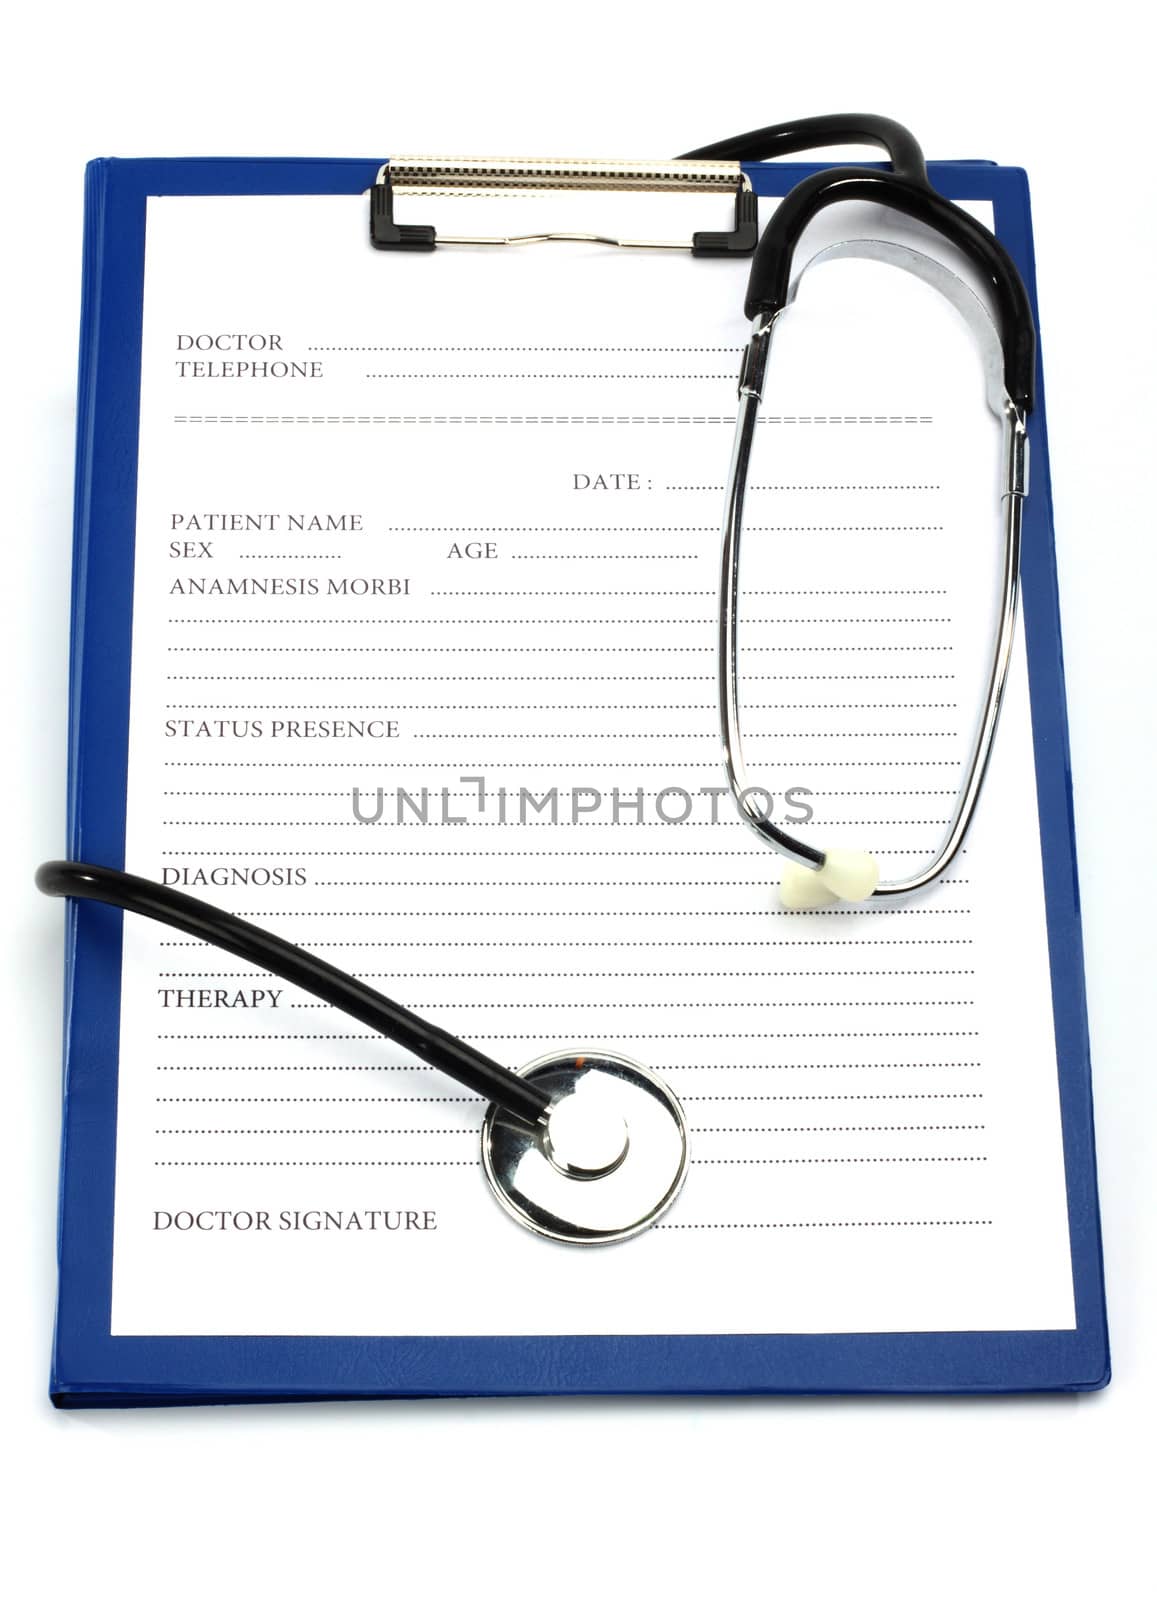 Clipboard and Stethoscope by alexkosev